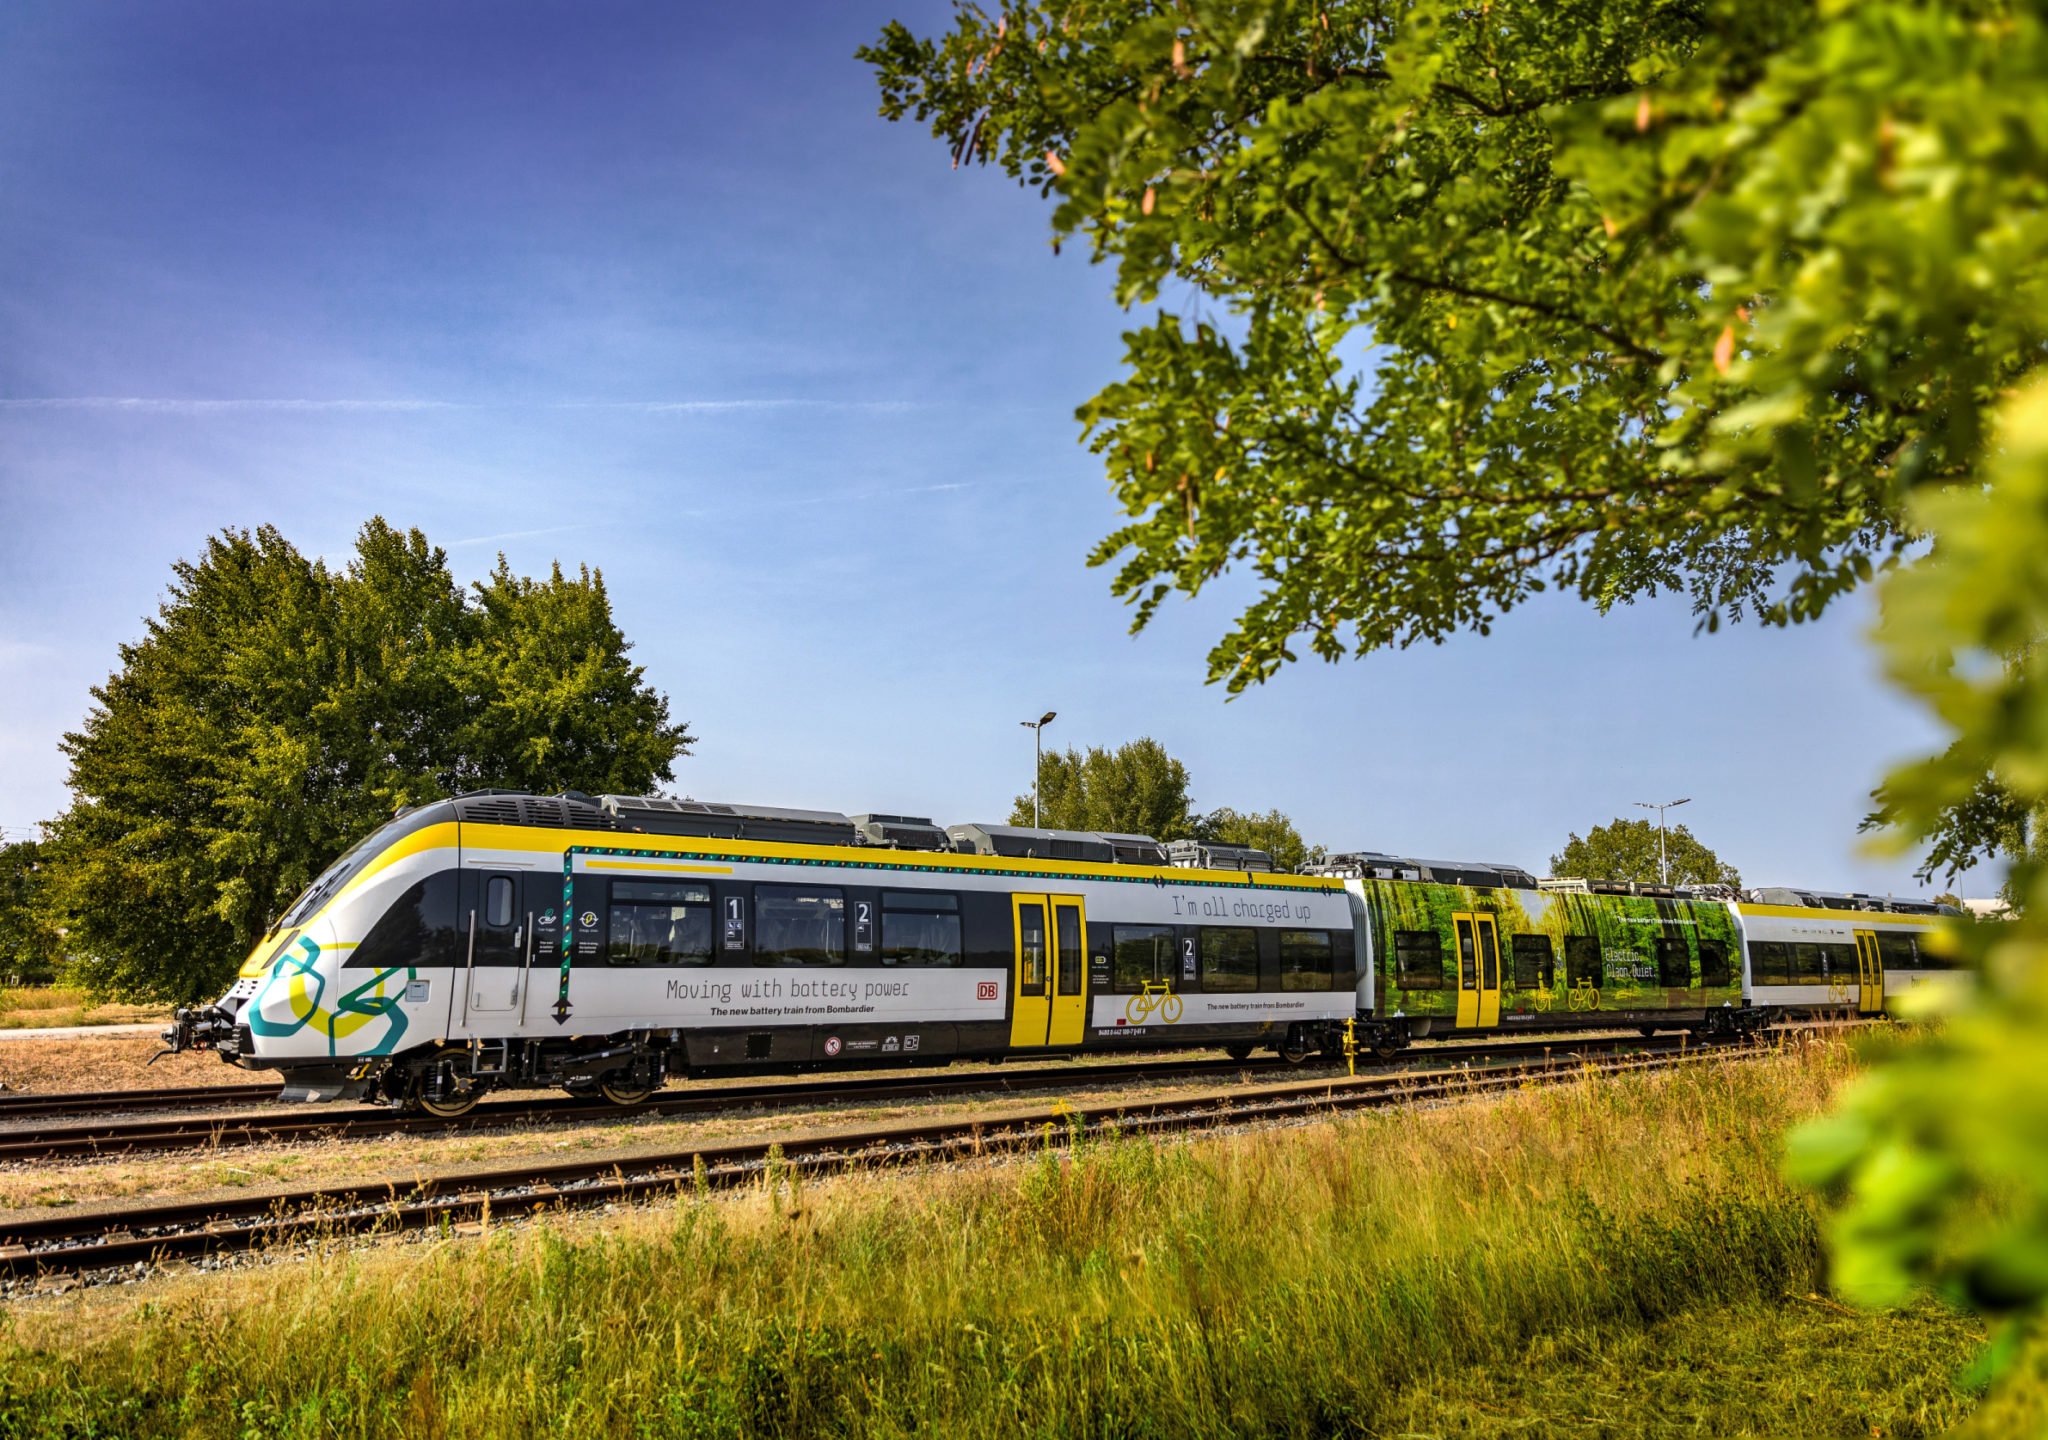 Bombardier's battery-powered train – the TALENT 3 EMU